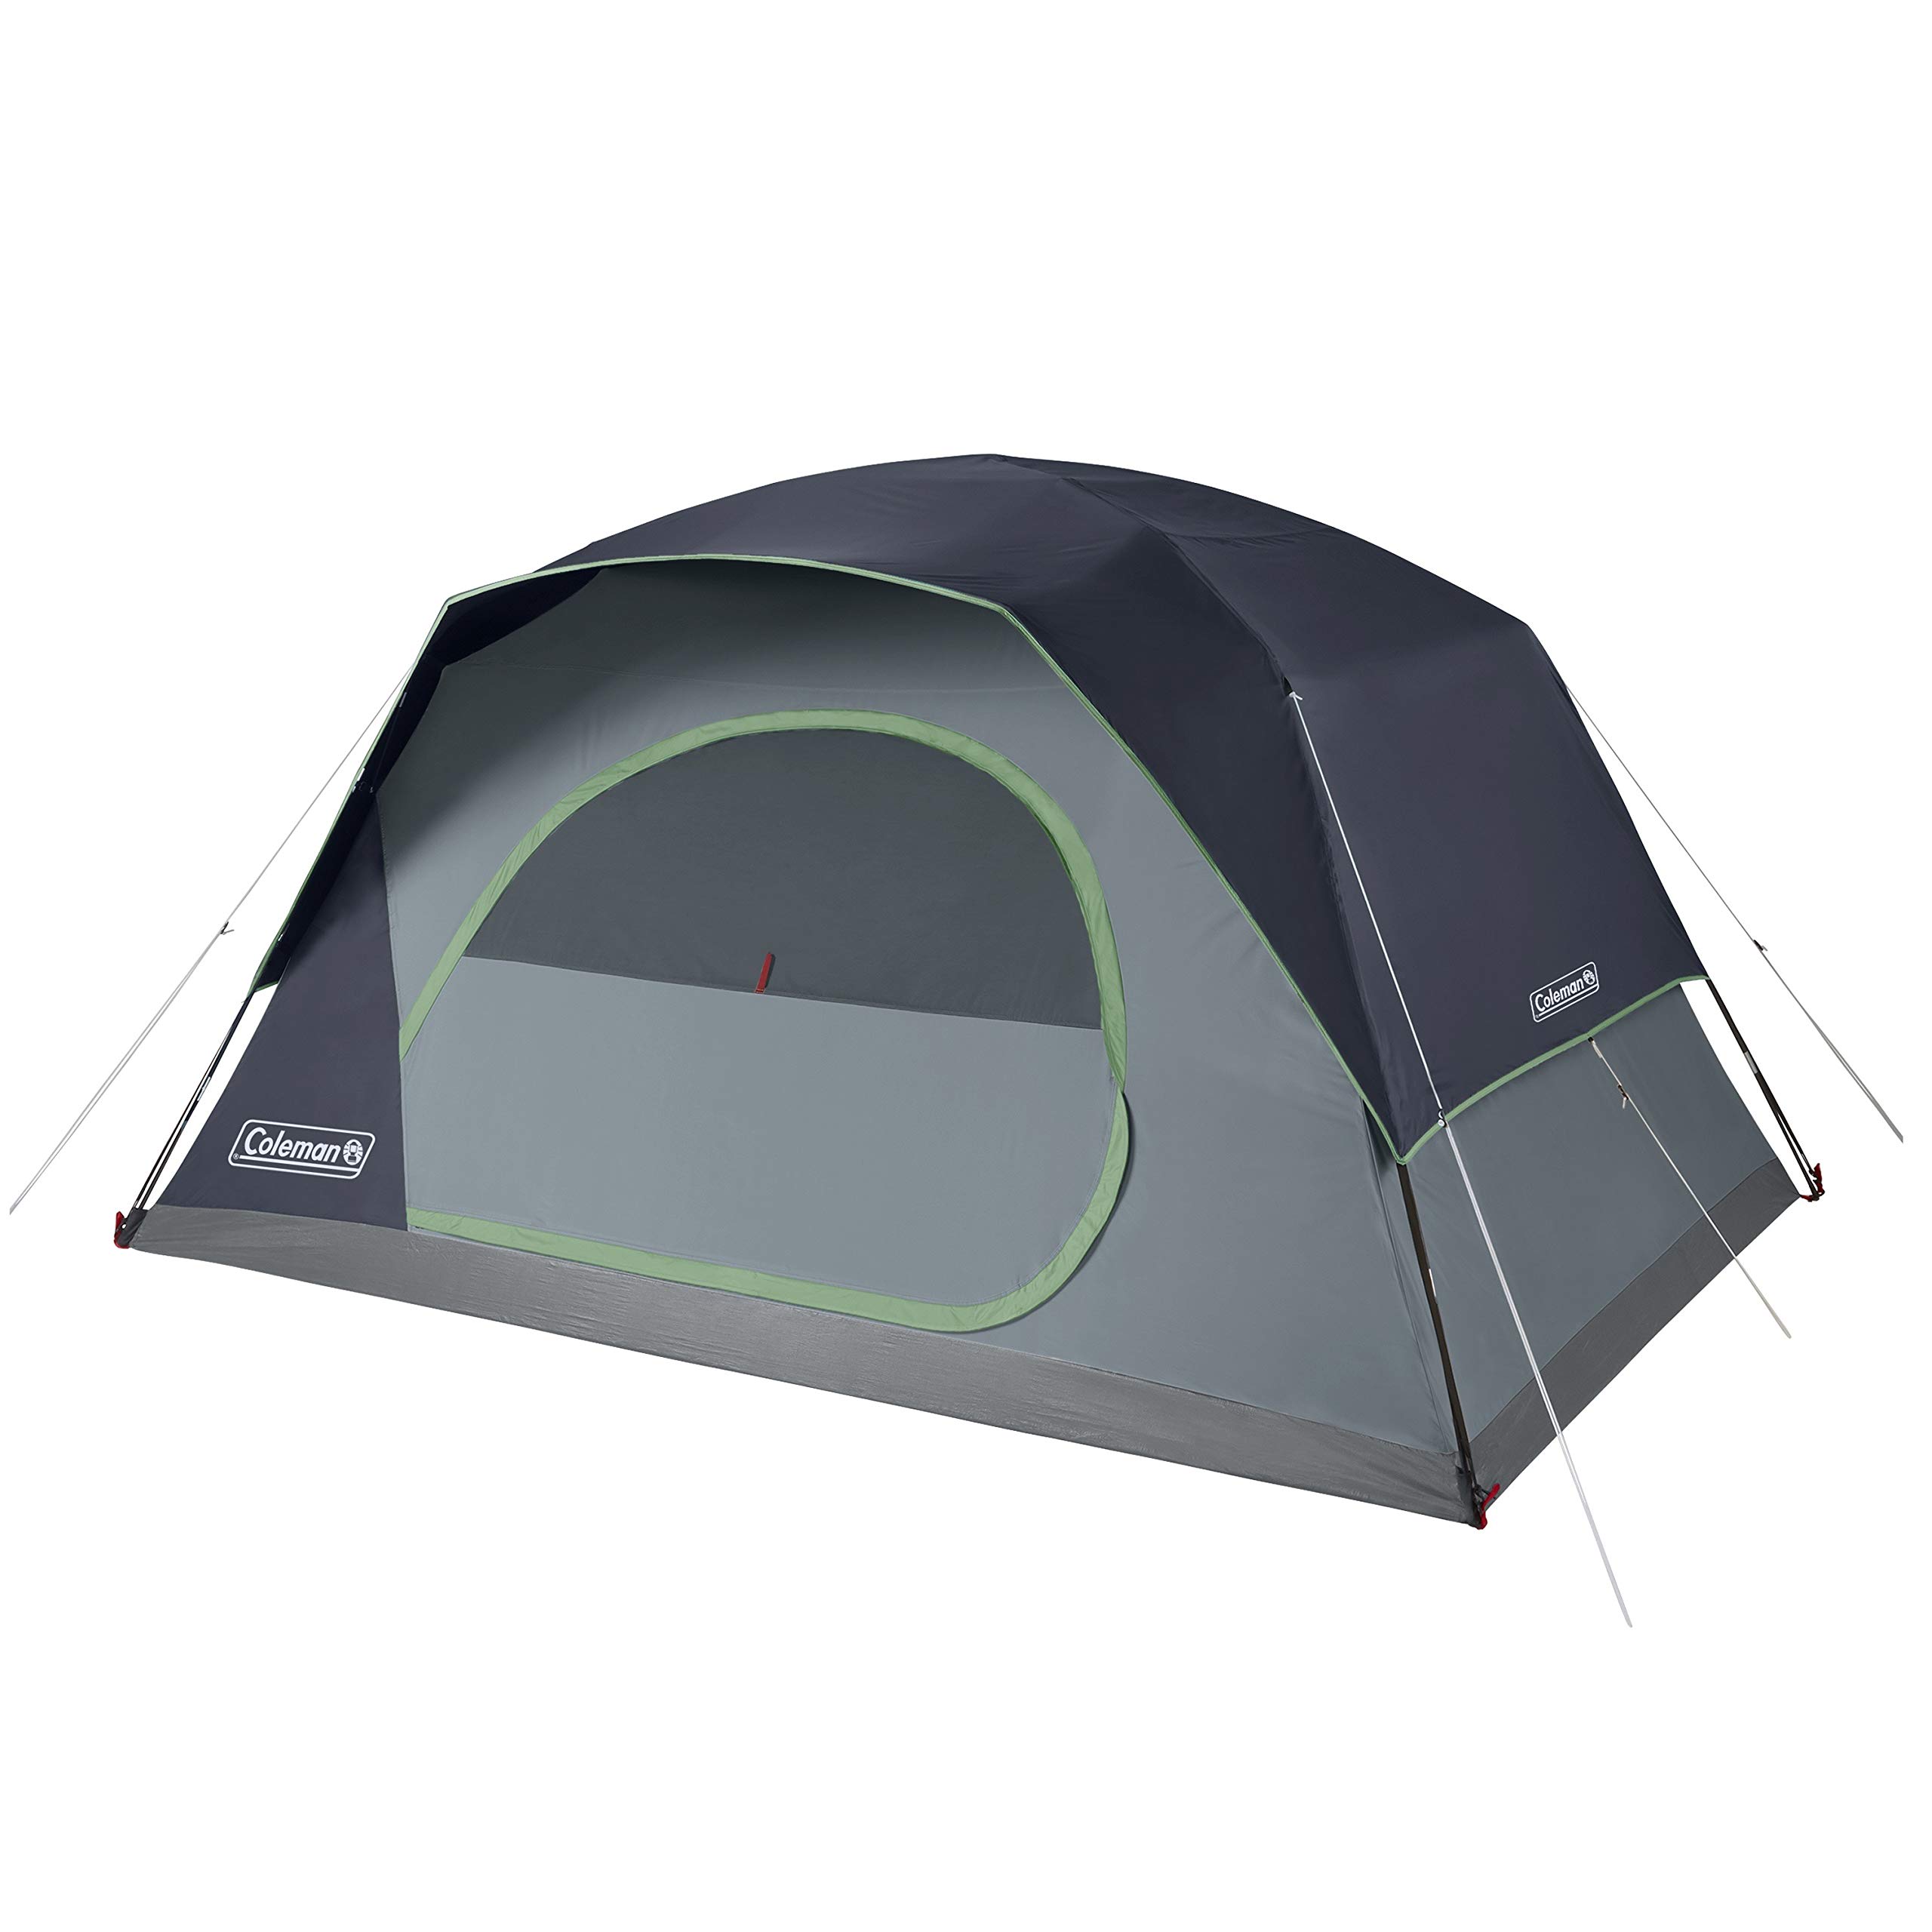 12' x 9' Coleman Skydome 8 Person Family Camping Tent w/ 5 Minute Setup & Strong Frame (Blue) $92.50 + Free Shipping